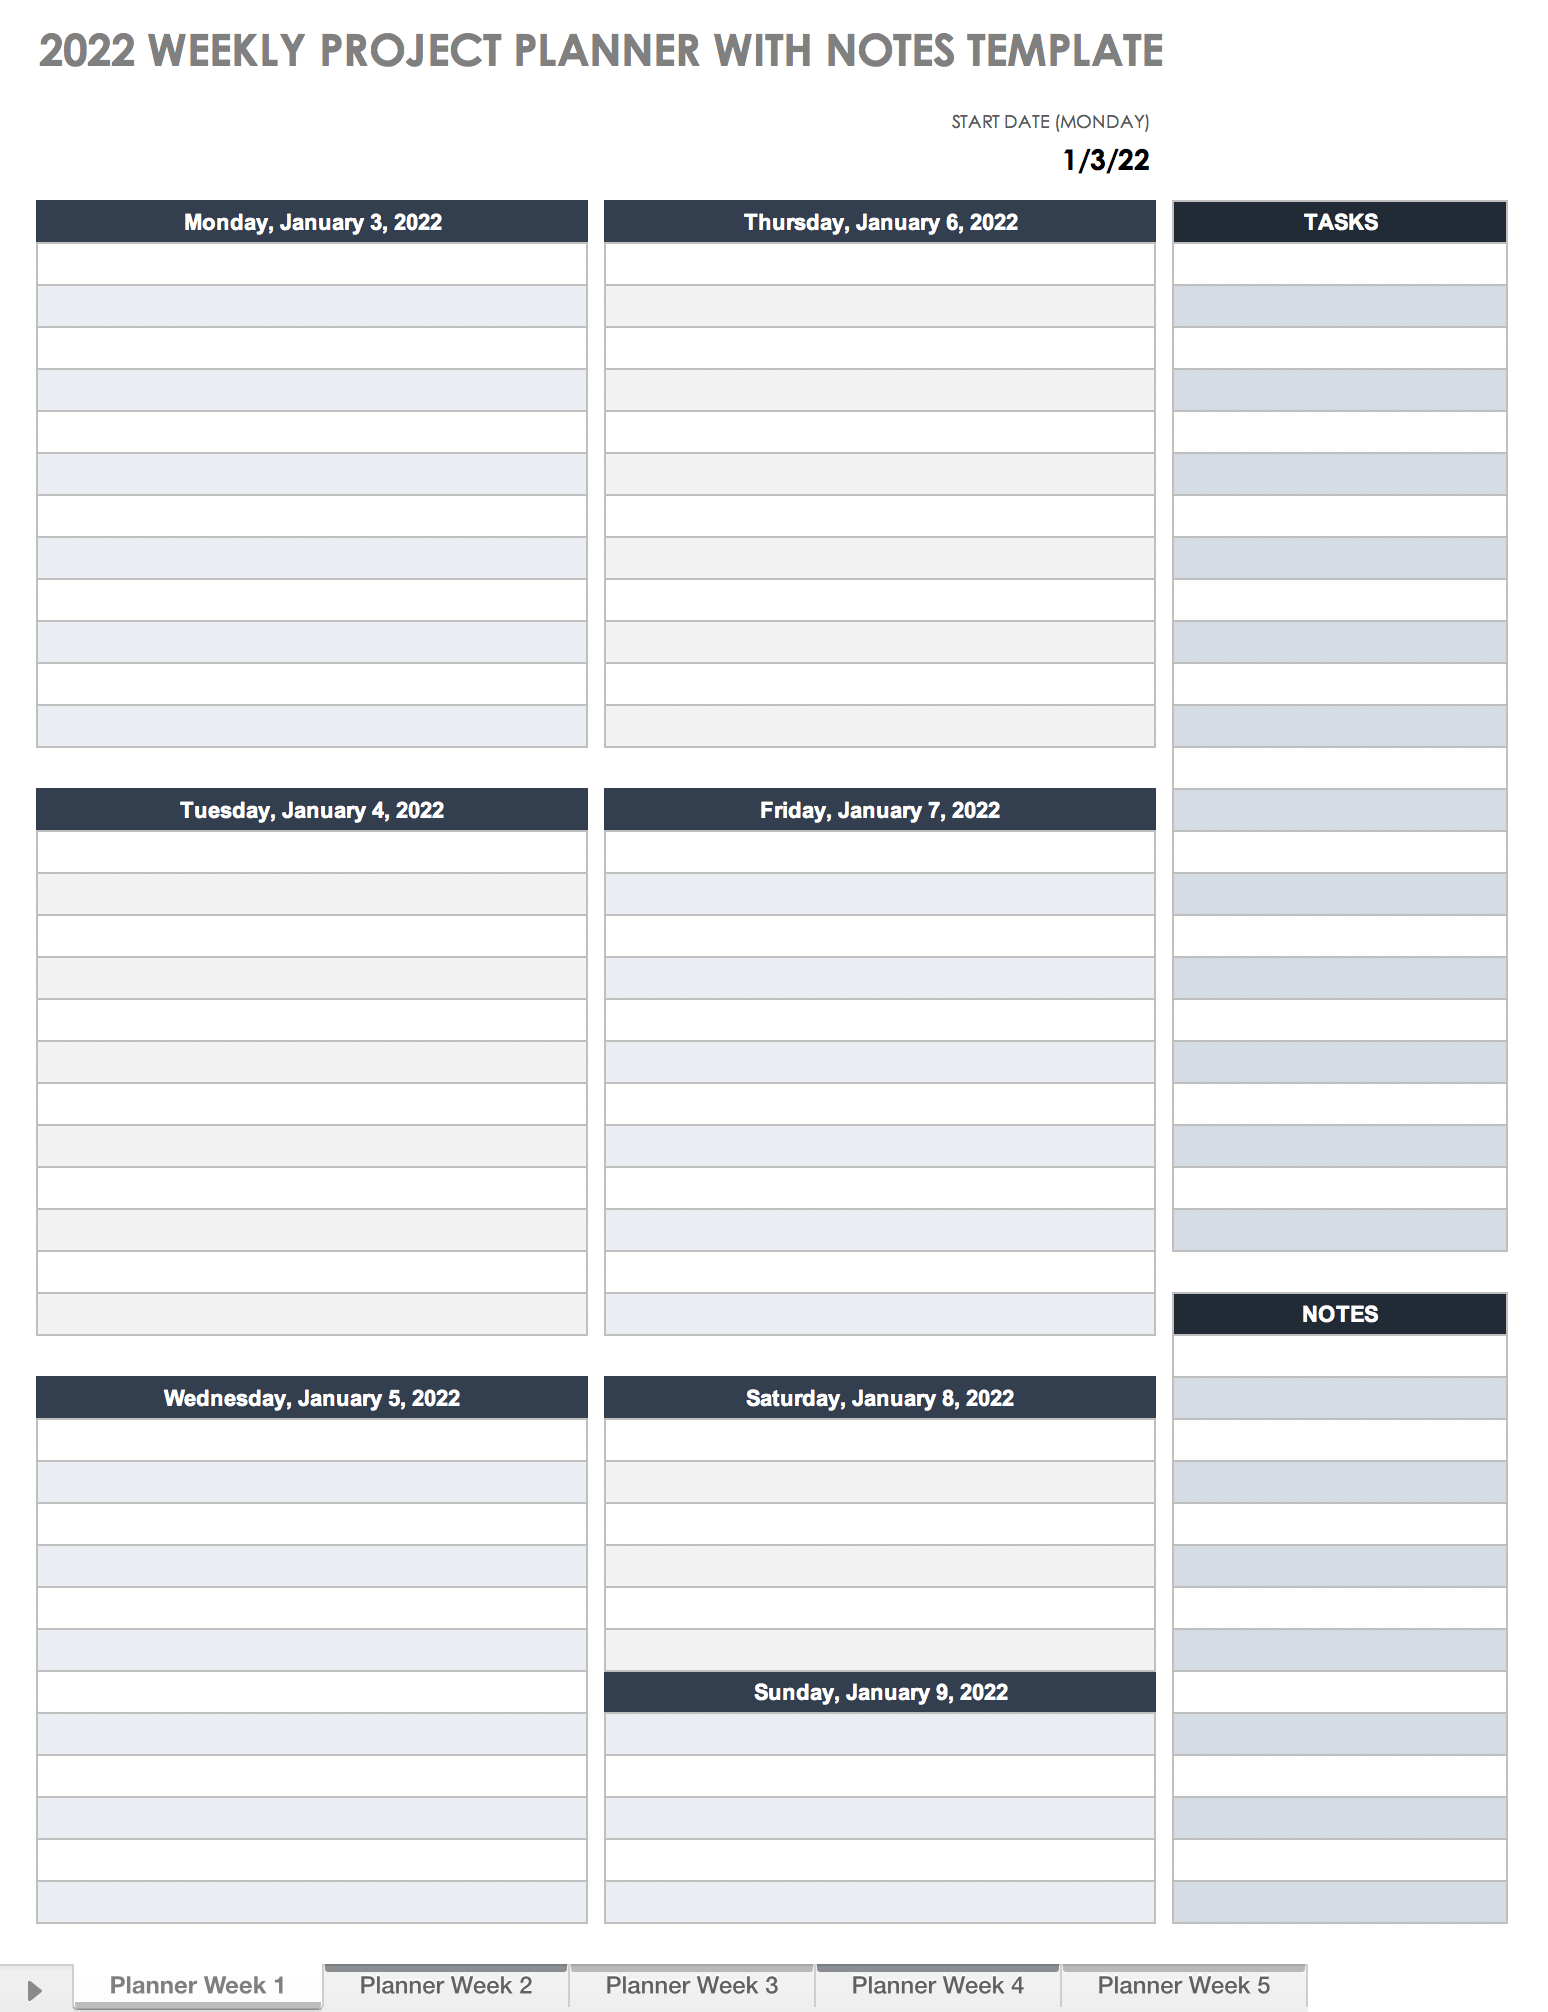 2022 Weekly Project Planner with Notes Templates